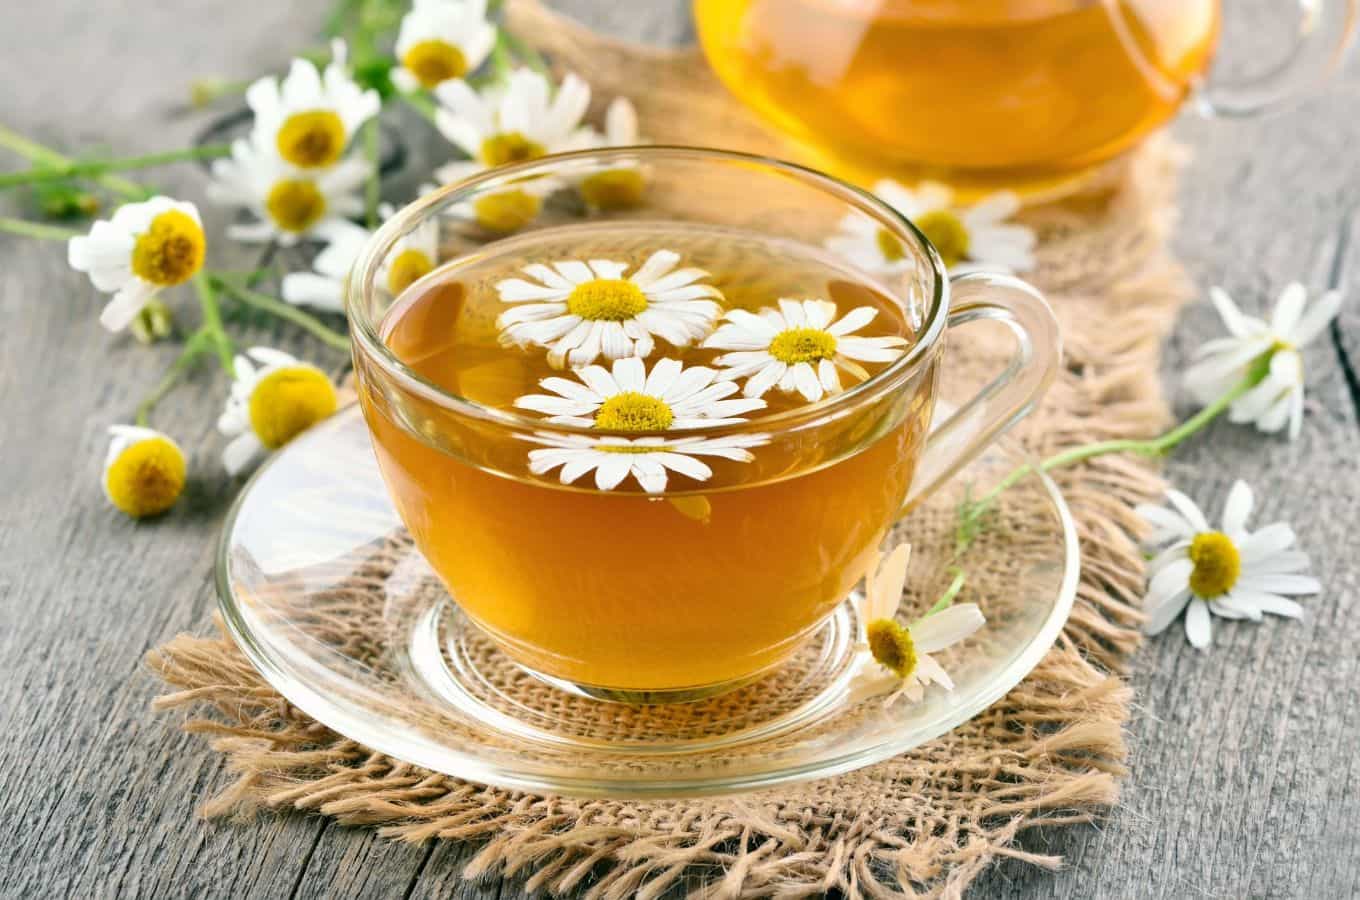 These Amazing Health Benefits Of Chamomile Tea Cannot Be Ignored